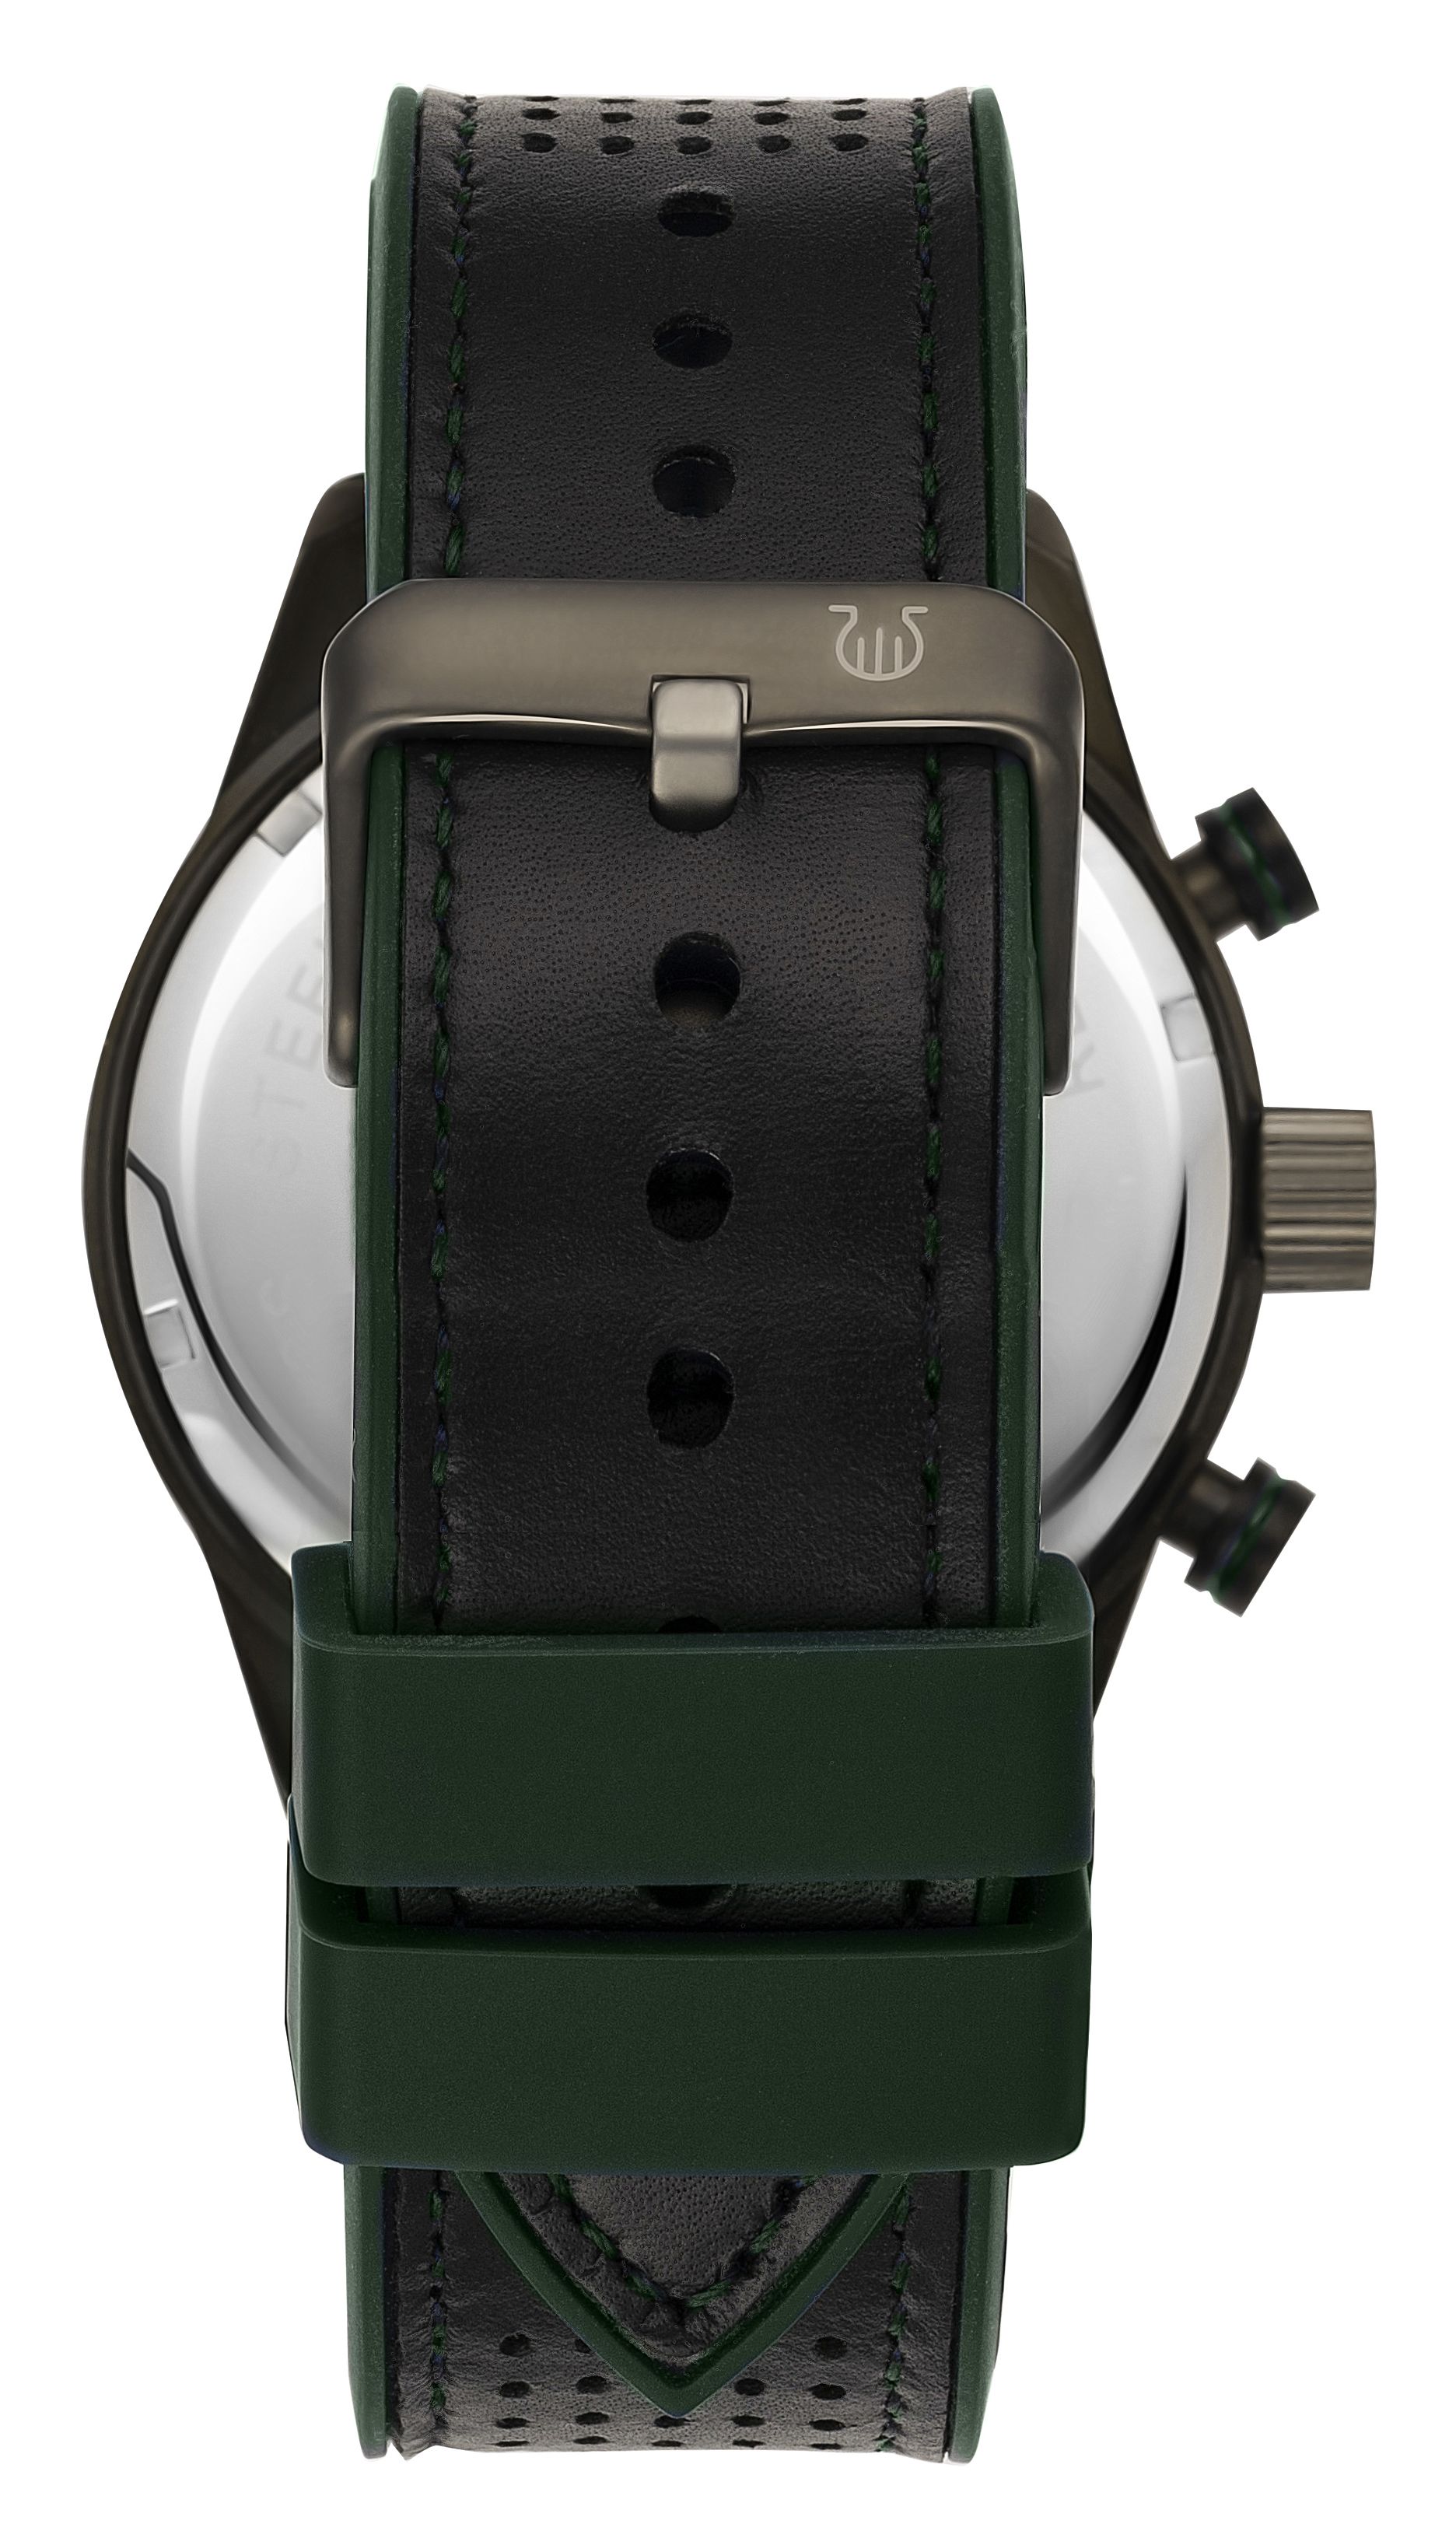 This Orphelia Sandblast Multi Dial Watch for Men is the perfect timepiece to wear or to gift. It's Gun 44 mm Round case combined with the comfortable Green Silicone watch band will ensure you enjoy this stunning timepiece without any compromise. Operated by a high quality Quartz movement and water resistant to 10 bars, your watch will keep ticking. LUXURY DESIGN: ORPHELIA Sandblast Multi dial watch with a Miyota Quartz movement includes a date display. This watch features a 24 hour display, Tachymeter and Luminous hands & numbers it will give you an urbane look PREMIUM QUALITY: By using high-quality materials  Glass: Mineral Glass  Case material: Stainless steel  Bracelet material: Silicone- Water resistant: 10 bars COMPACT SIZE: Case diameter: 44 mm  Height: 12 mm  Strap- Length: 21 cm  Width: 22 mm. Due to this practical handy size  the watch is absolutely for everyday use-Weight: 88 g